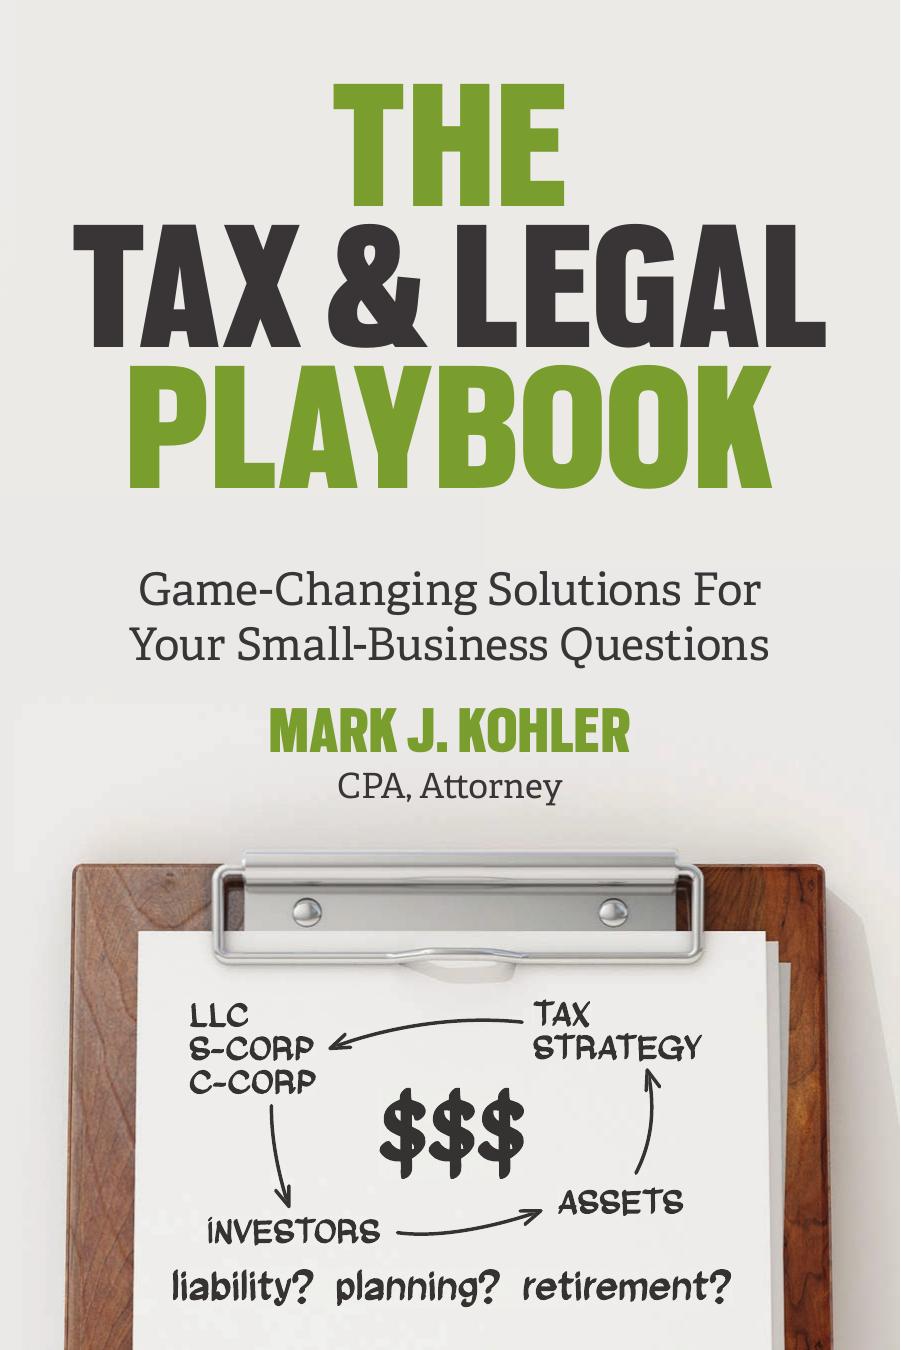 The Tax and Legal Playbook: Game-Changing Solutions to Your Small-Business Questions by Mark J. Kohler